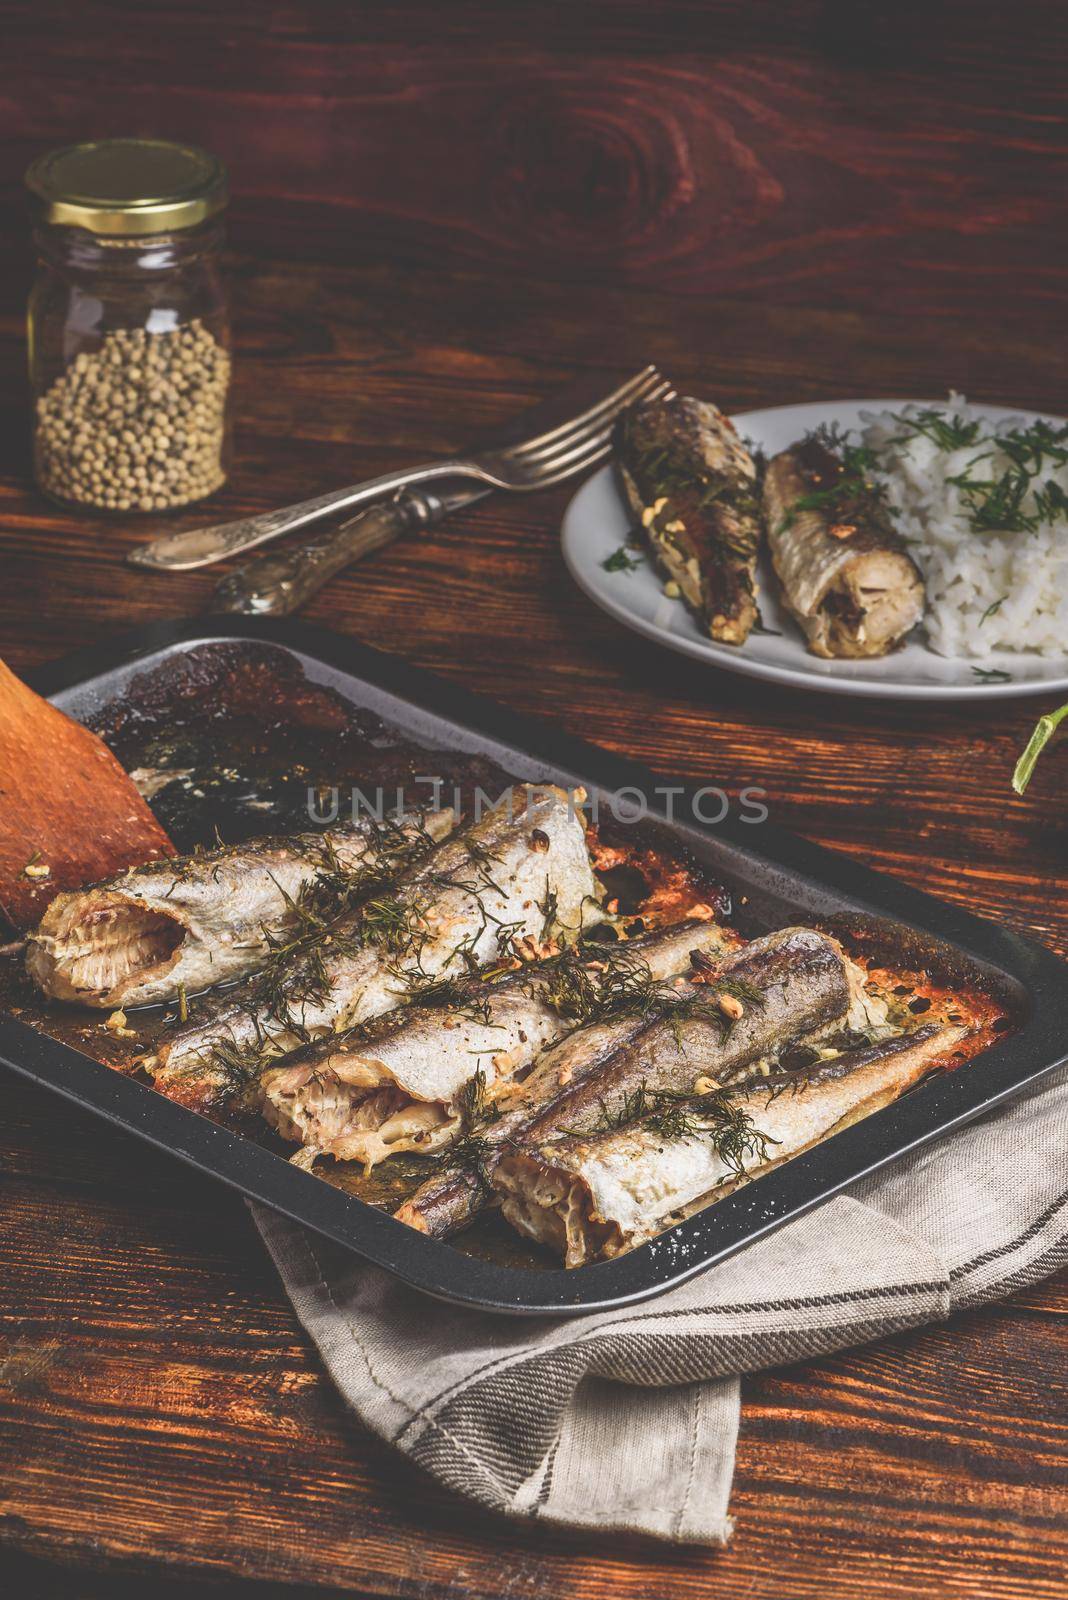 Baked fish carcasses on baking sheet over wooden surface